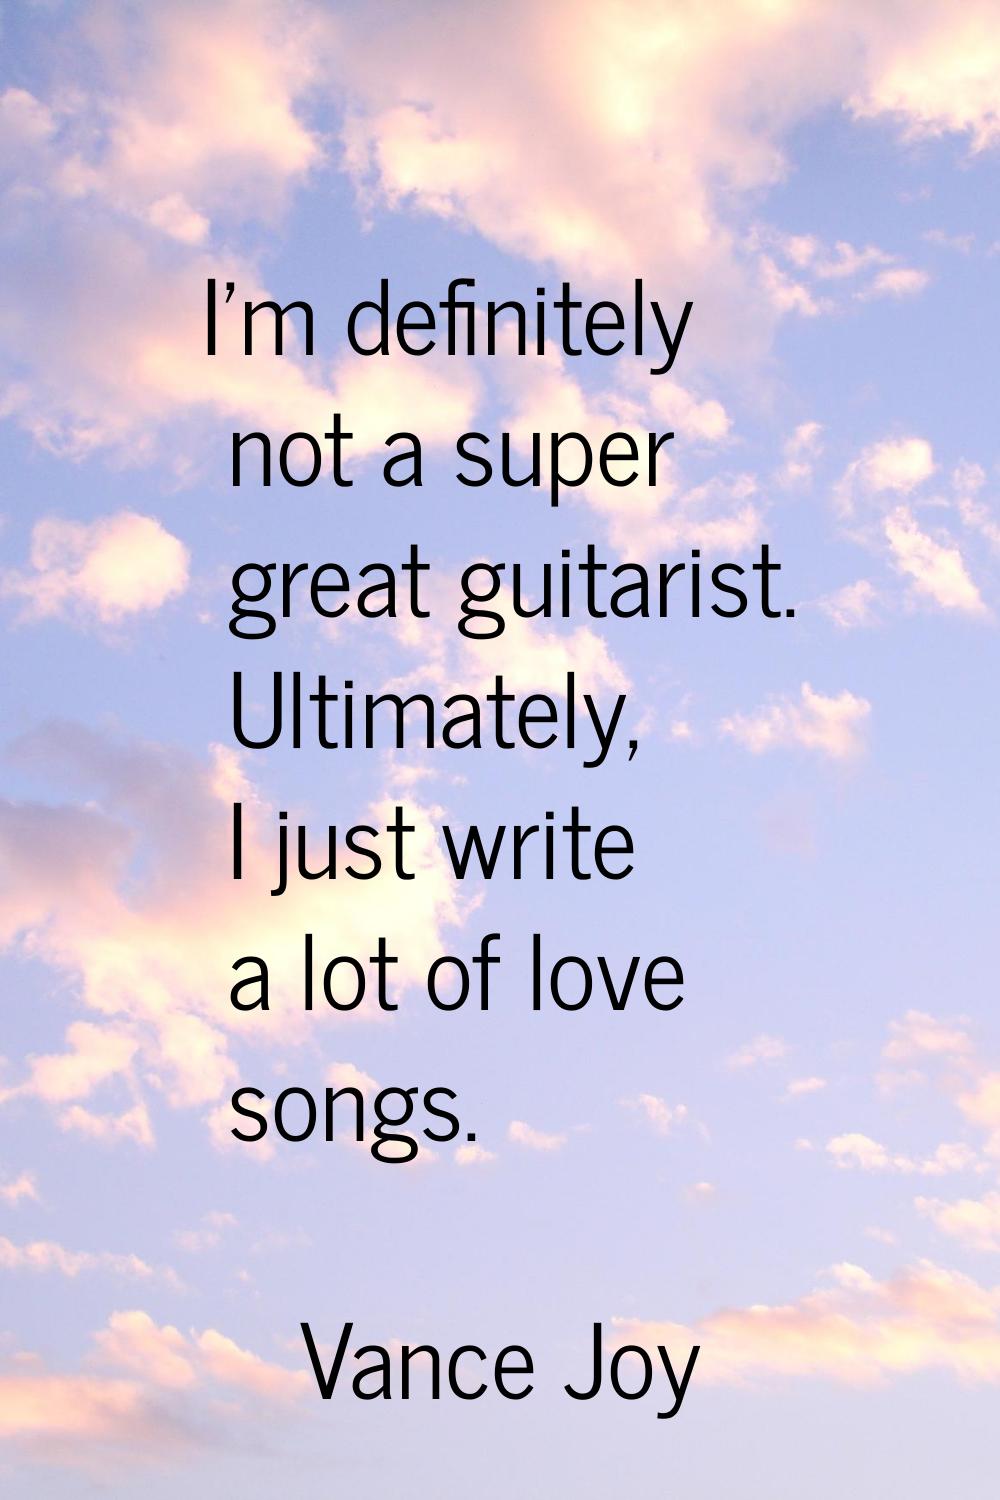 I'm definitely not a super great guitarist. Ultimately, I just write a lot of love songs.